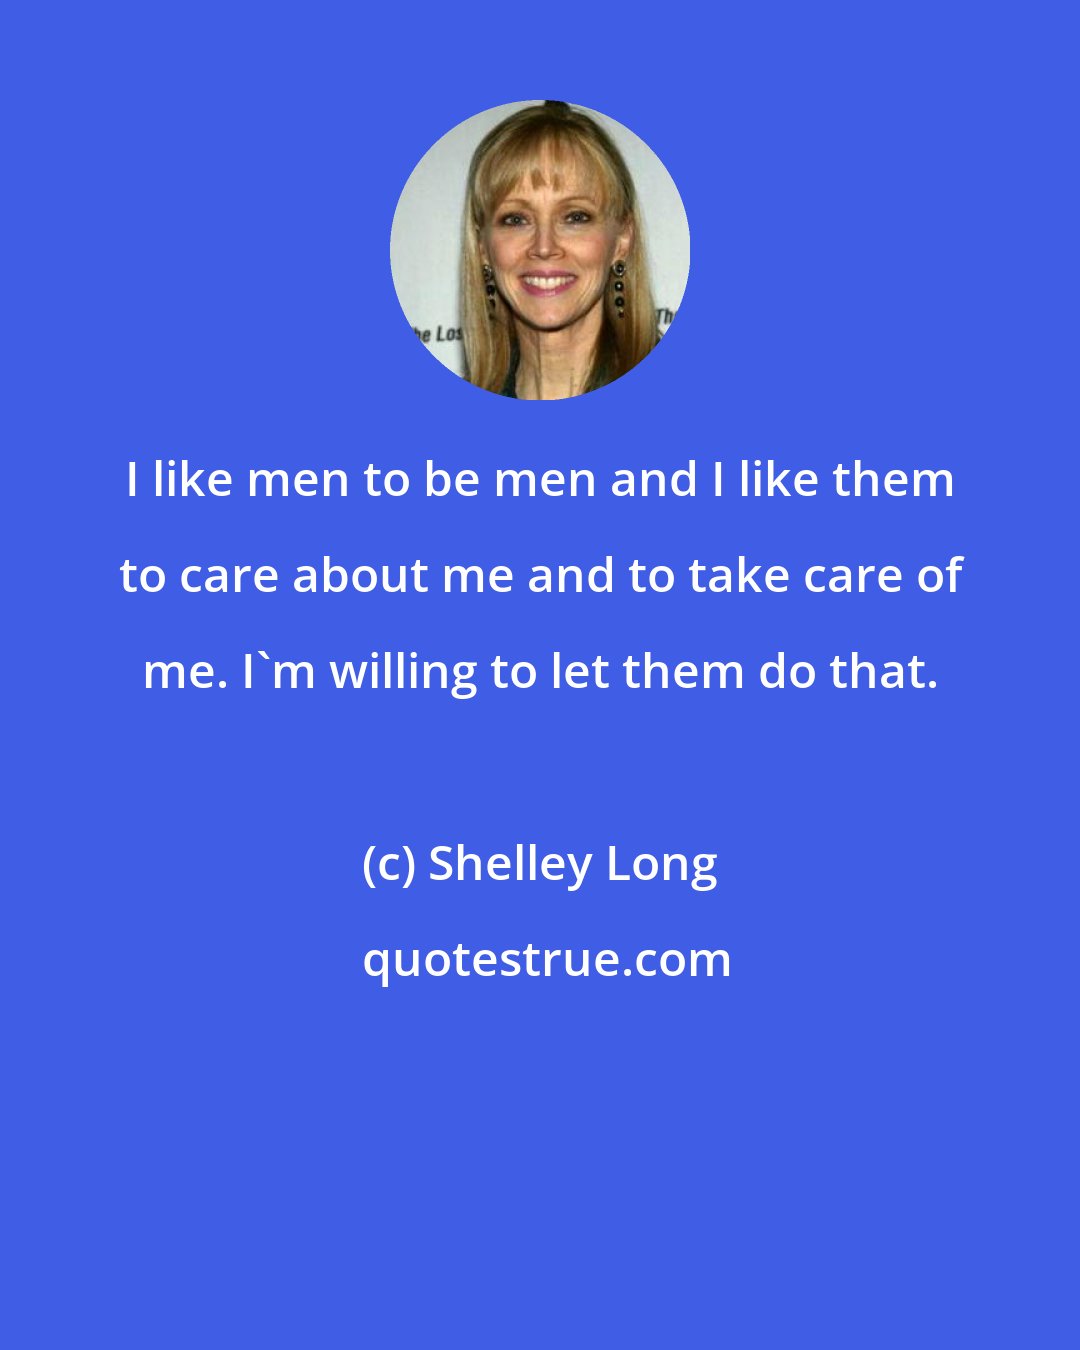 Shelley Long: I like men to be men and I like them to care about me and to take care of me. I'm willing to let them do that.